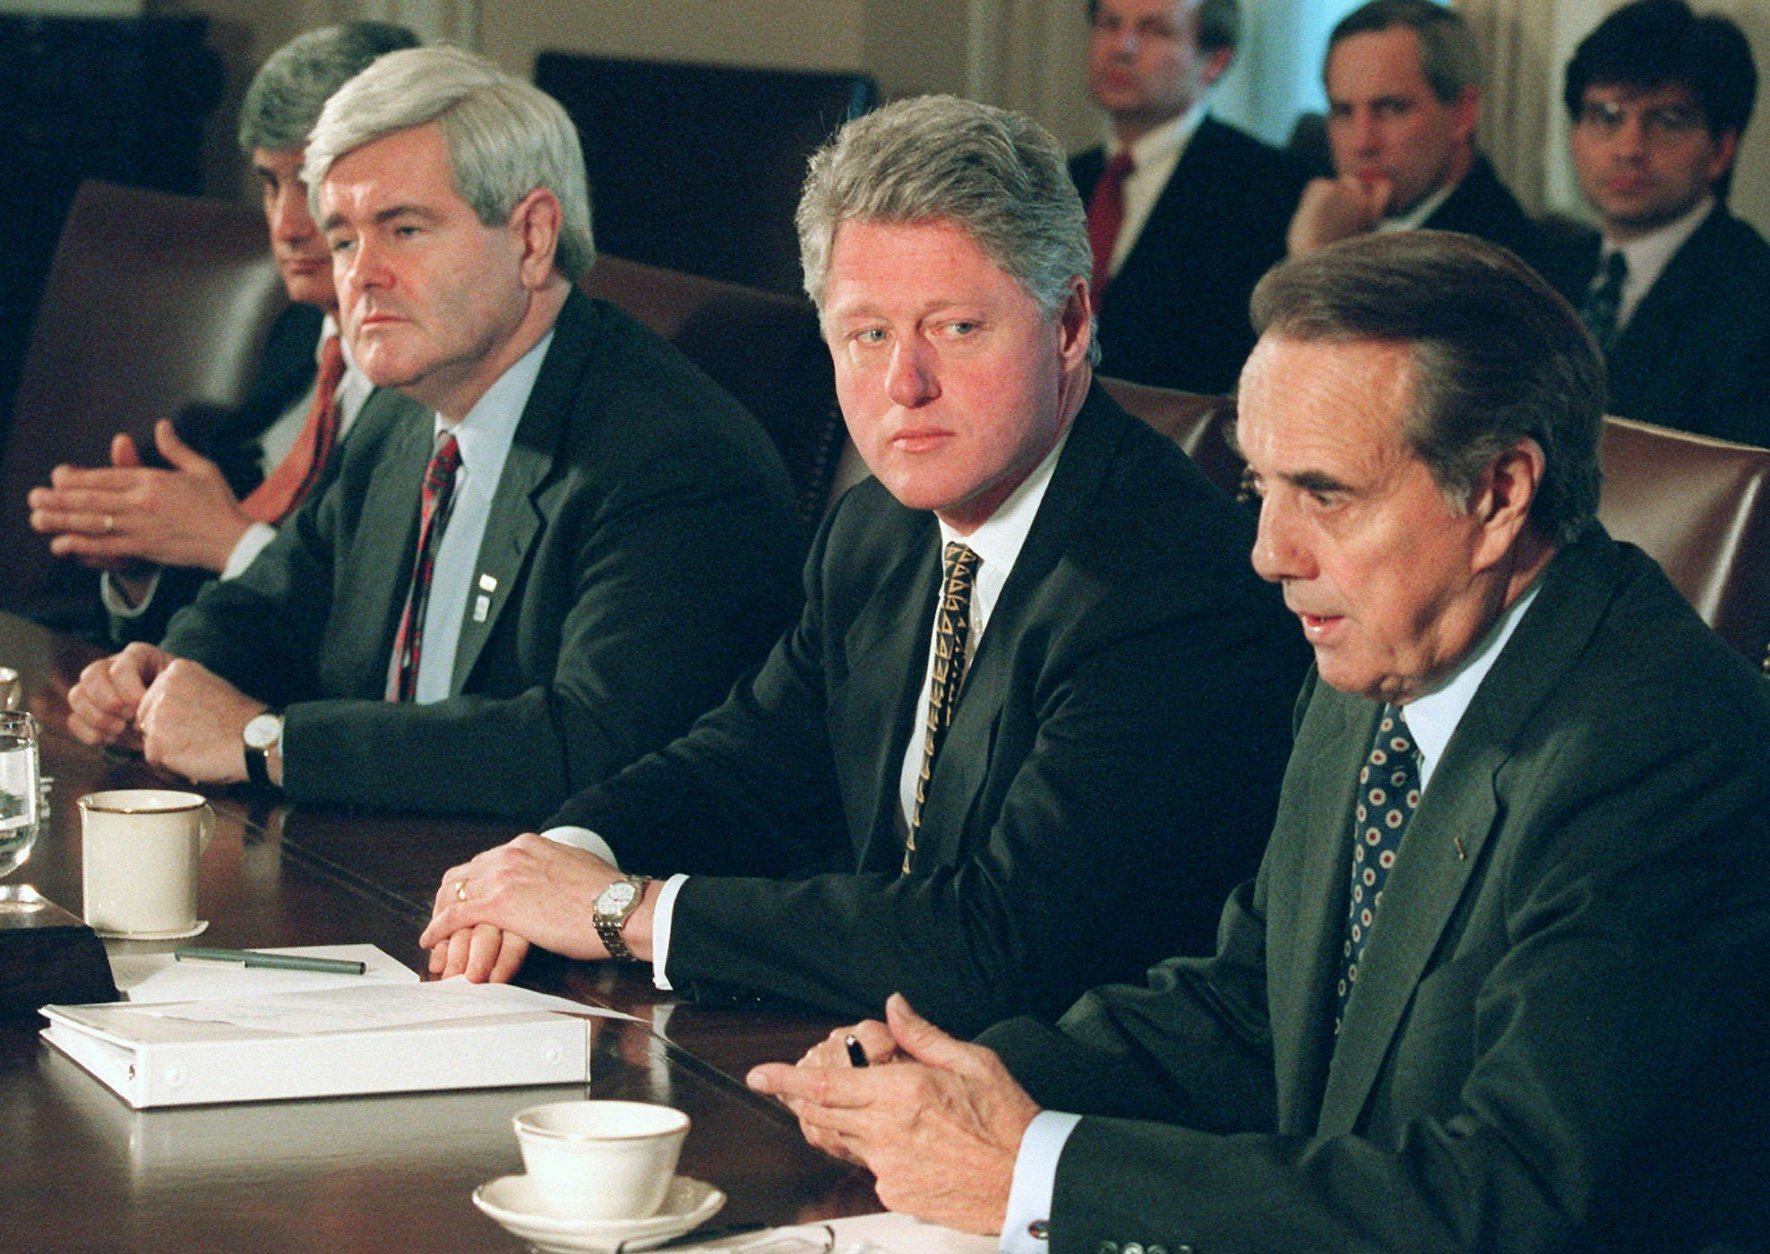 President Clinton meets with Republican congressional leaders at the White House Friday Dec. 29, 1995 to discuss the federal budget impasse. From left to right are Treasury Secreatry Robert Rubin, House Speaker Newt Gingrich, Clinton and Senate Majority Leader Bob Dole of Kansas. (AP Photo/Wilfredo Lee)